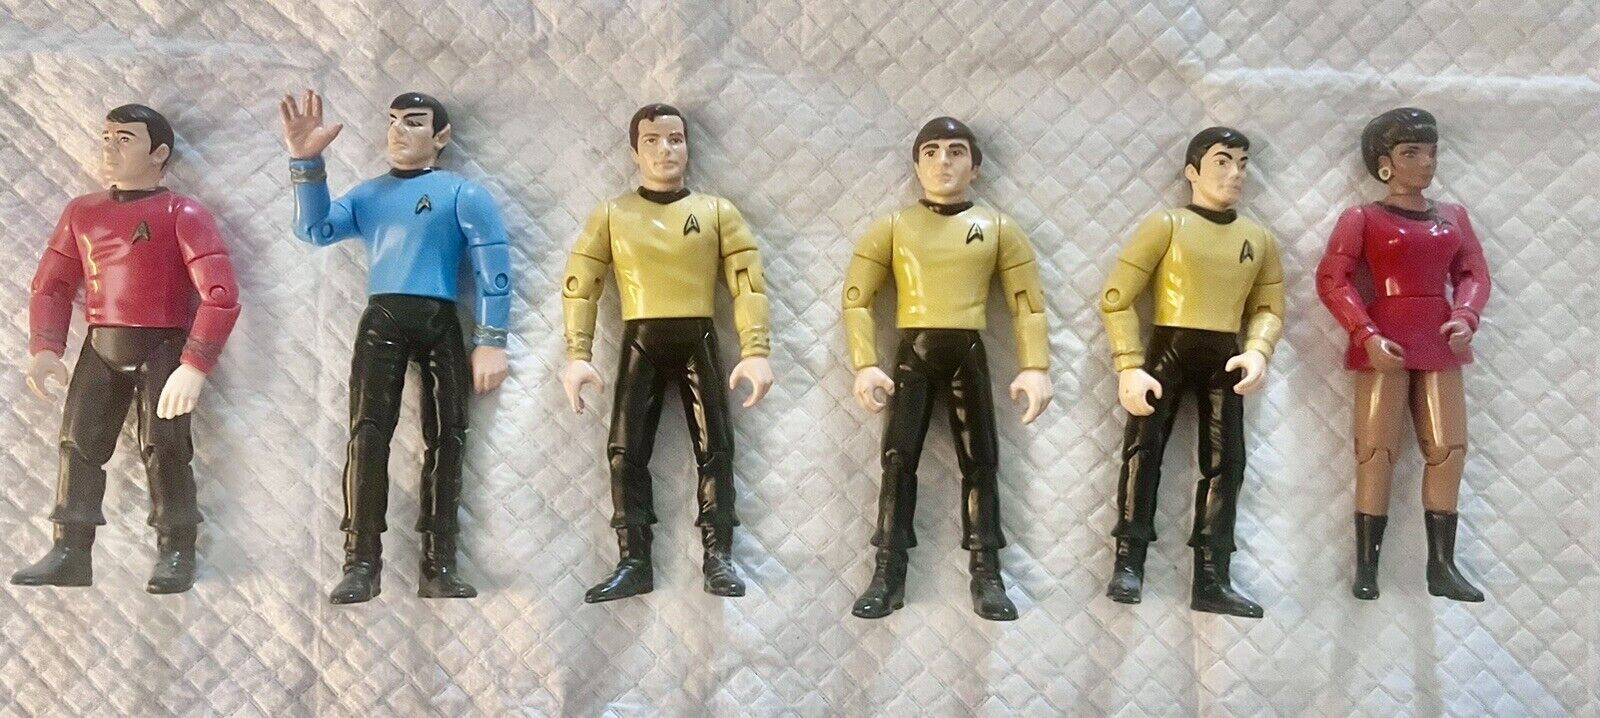 Playmates Star Trek Lot of 6 Loose Action Figures Kirk, Uhura, Spock, and More